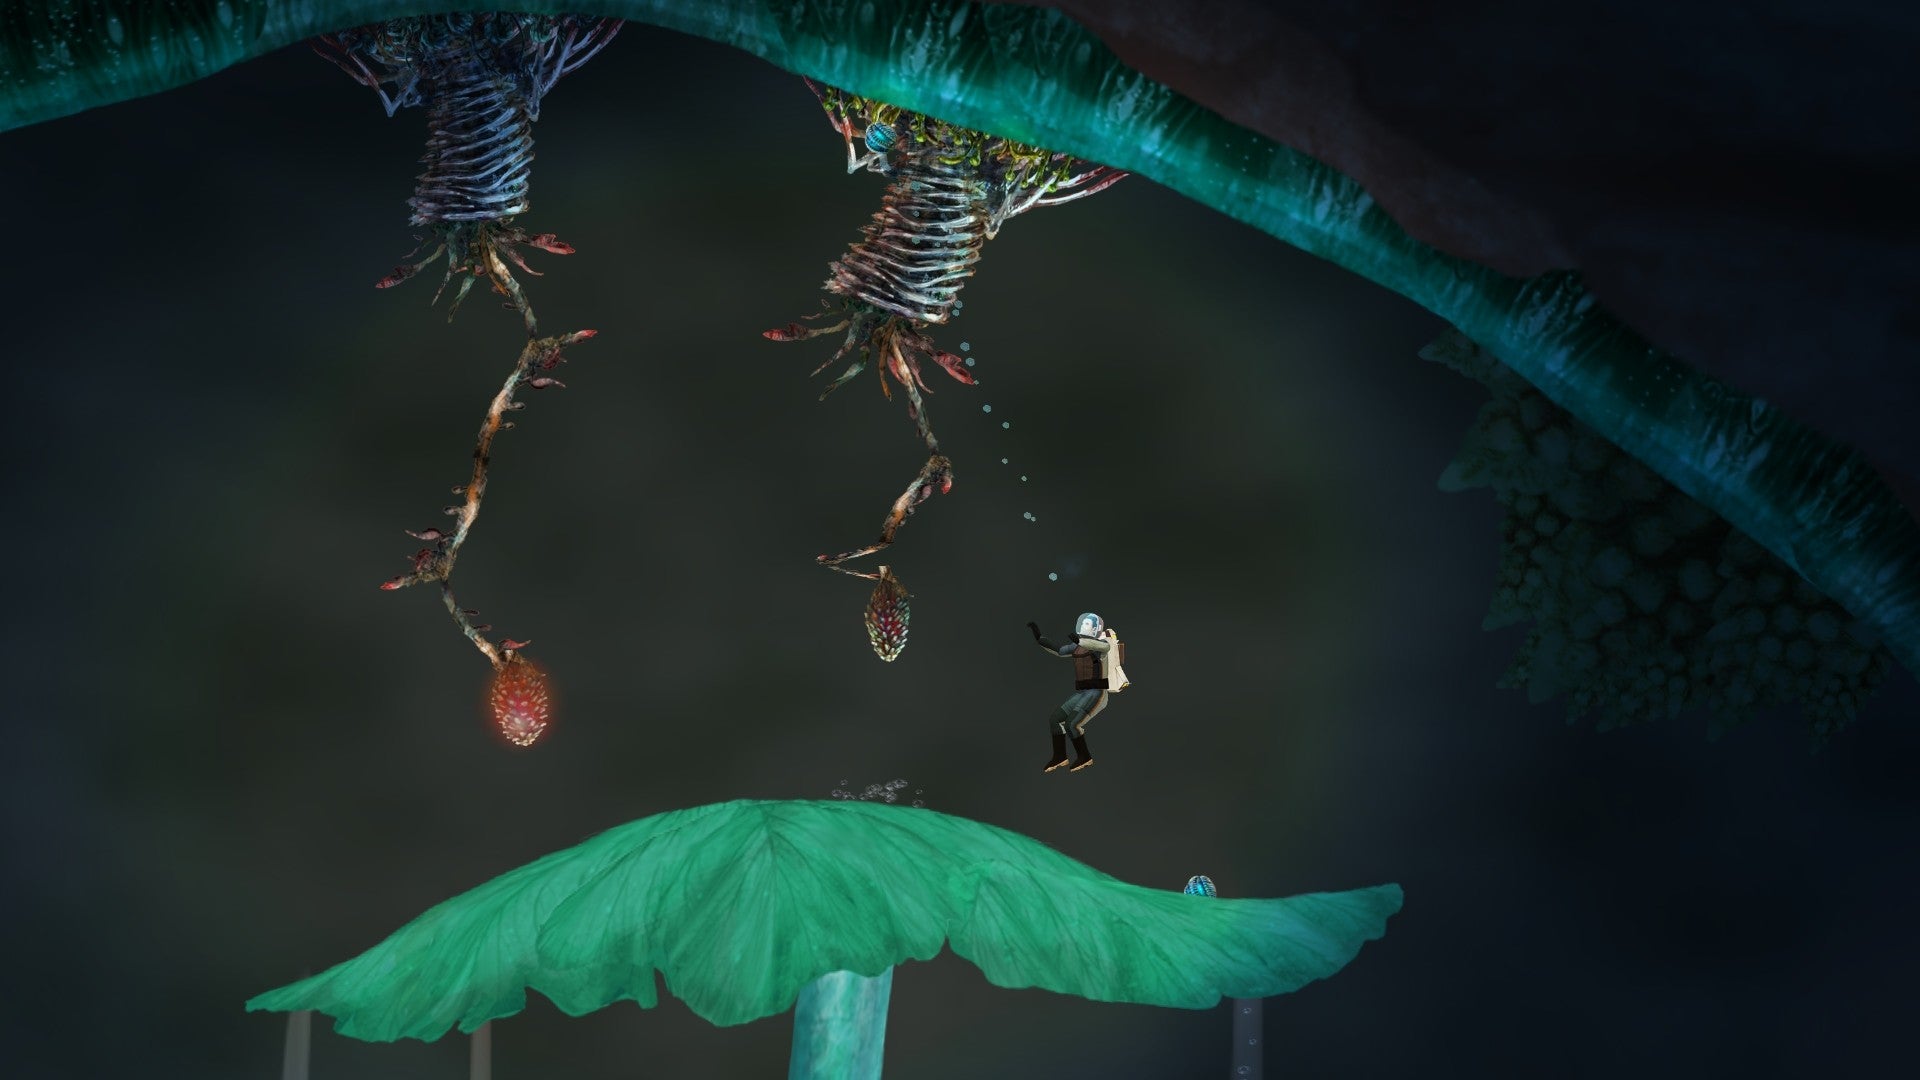 Action gardening in Waking Mars: the player, in a side on platformer, jumps on a giant green leaf and wrangles two spikey, dangerous looking venus flytrap-esque plants hanging from the ceiling